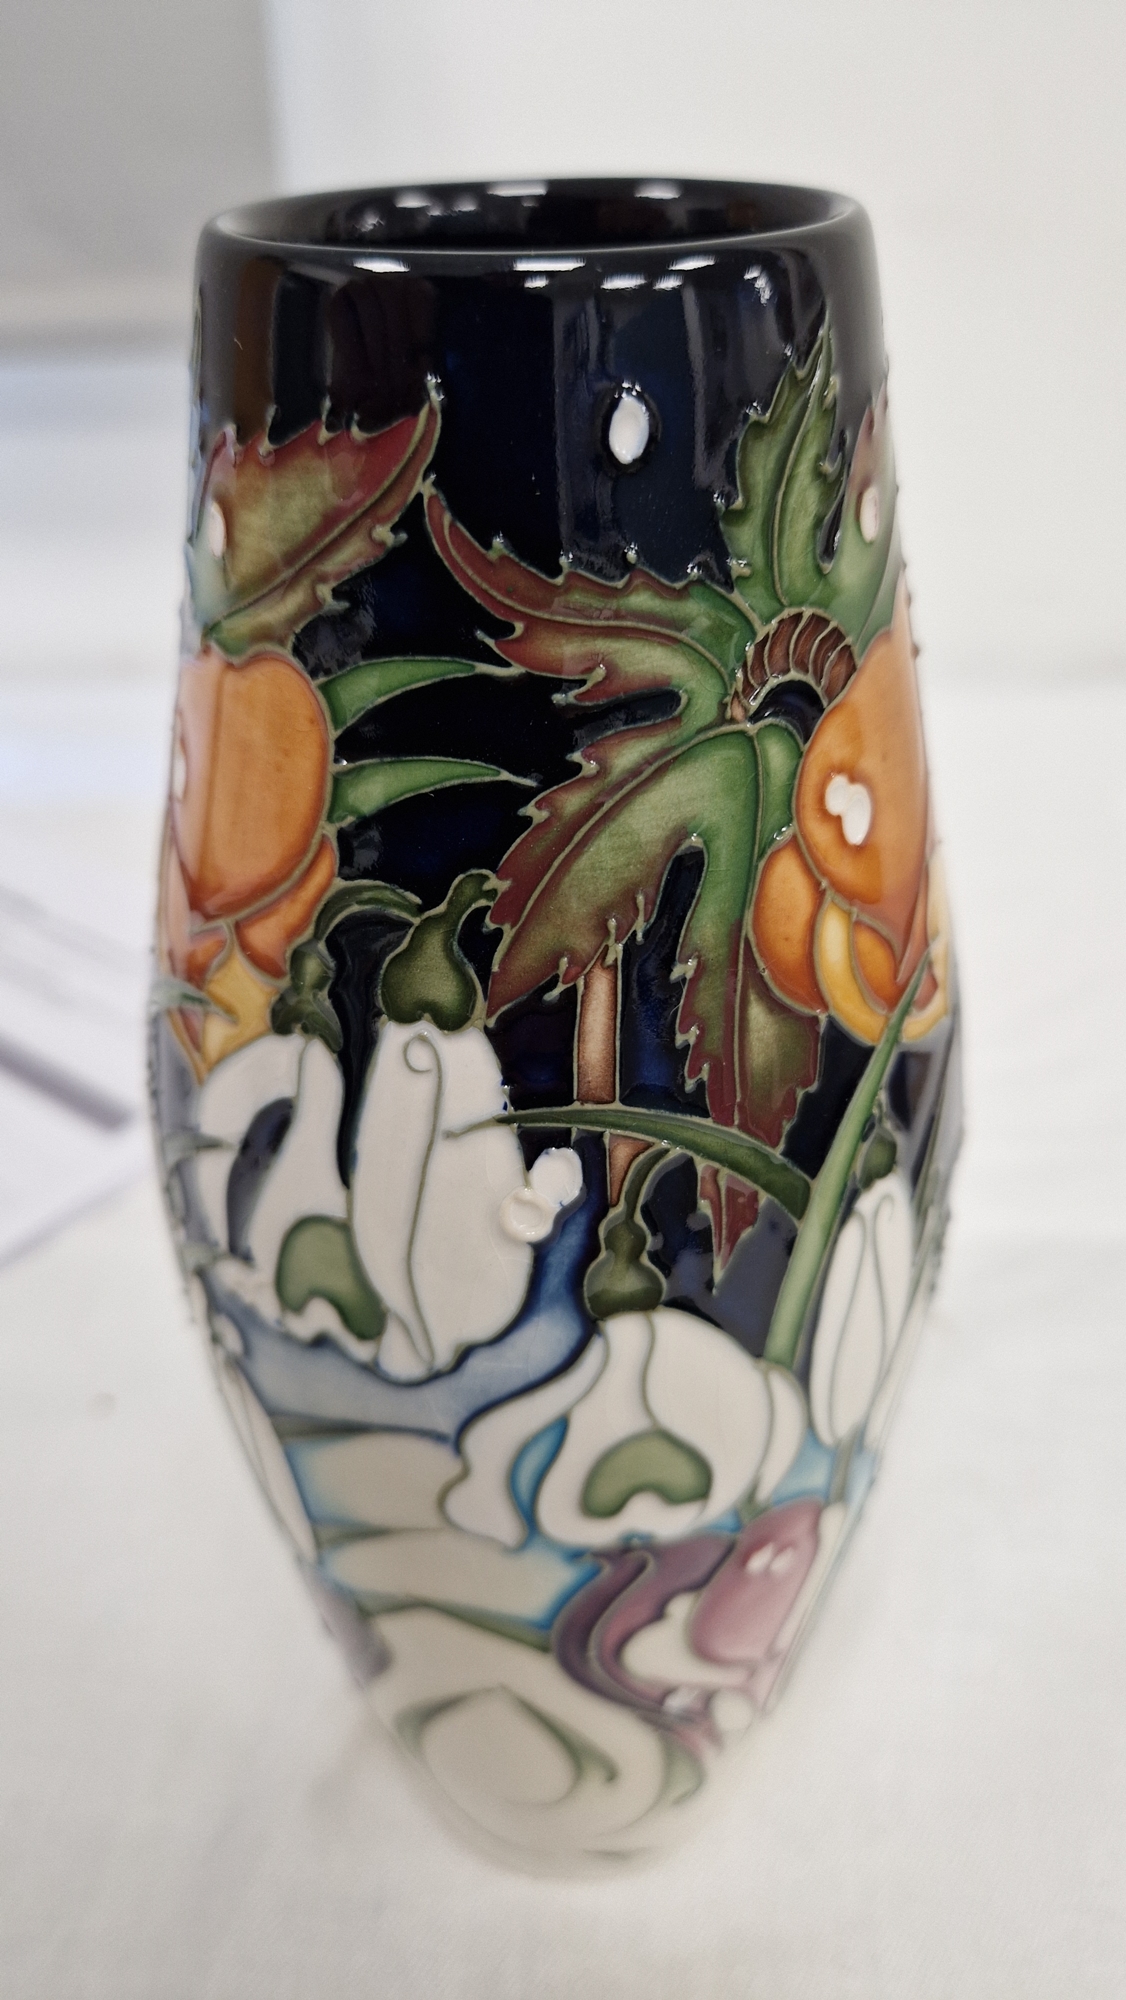 Moorcroft Snow Time pattern tapered baluster vase by Emma Bossons, printed and impressed marks, - Image 11 of 22